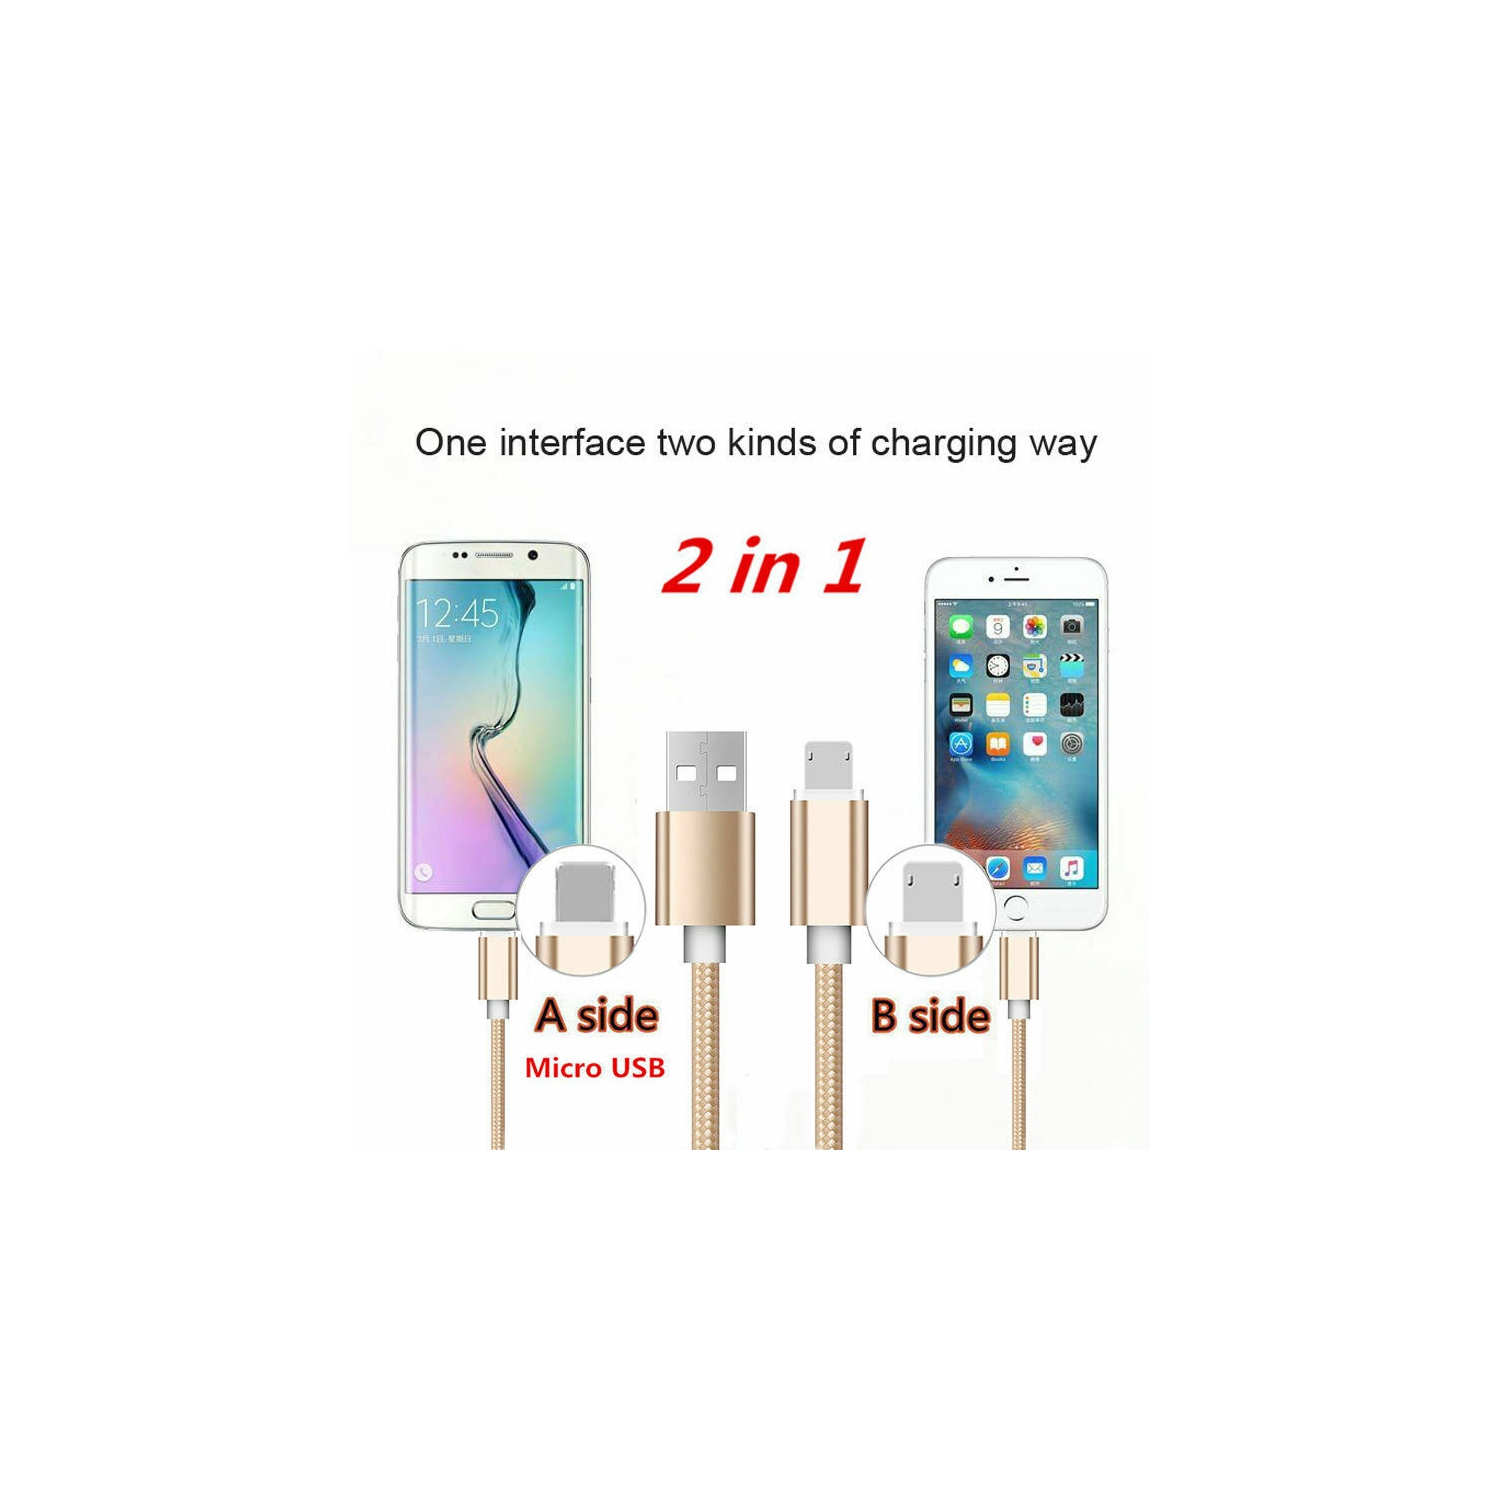 2 in 1 Double Sided Reverse Micro USB & Lightning Data Charge Cable for iPhone / Samsung & Android, Gold